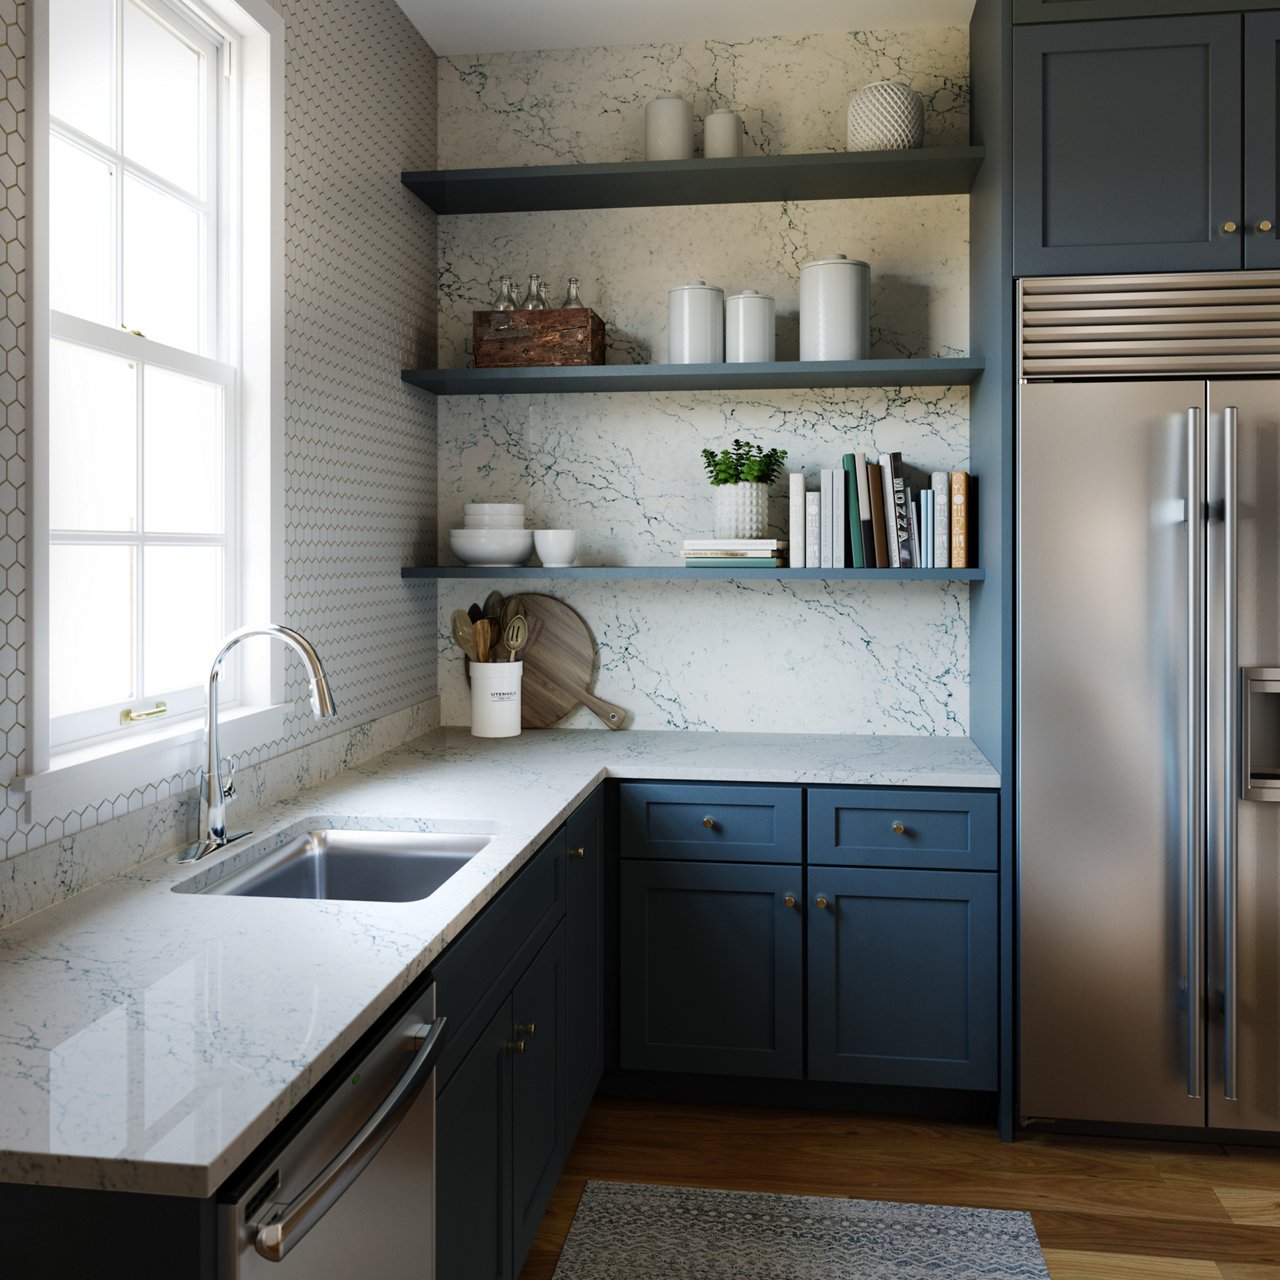 a kitchen with dark teal blue cabinets, white quartz countertops and backsplash with blue veining, open dark teal blue shelving, stainless steel appliances, and various kitchen decorations